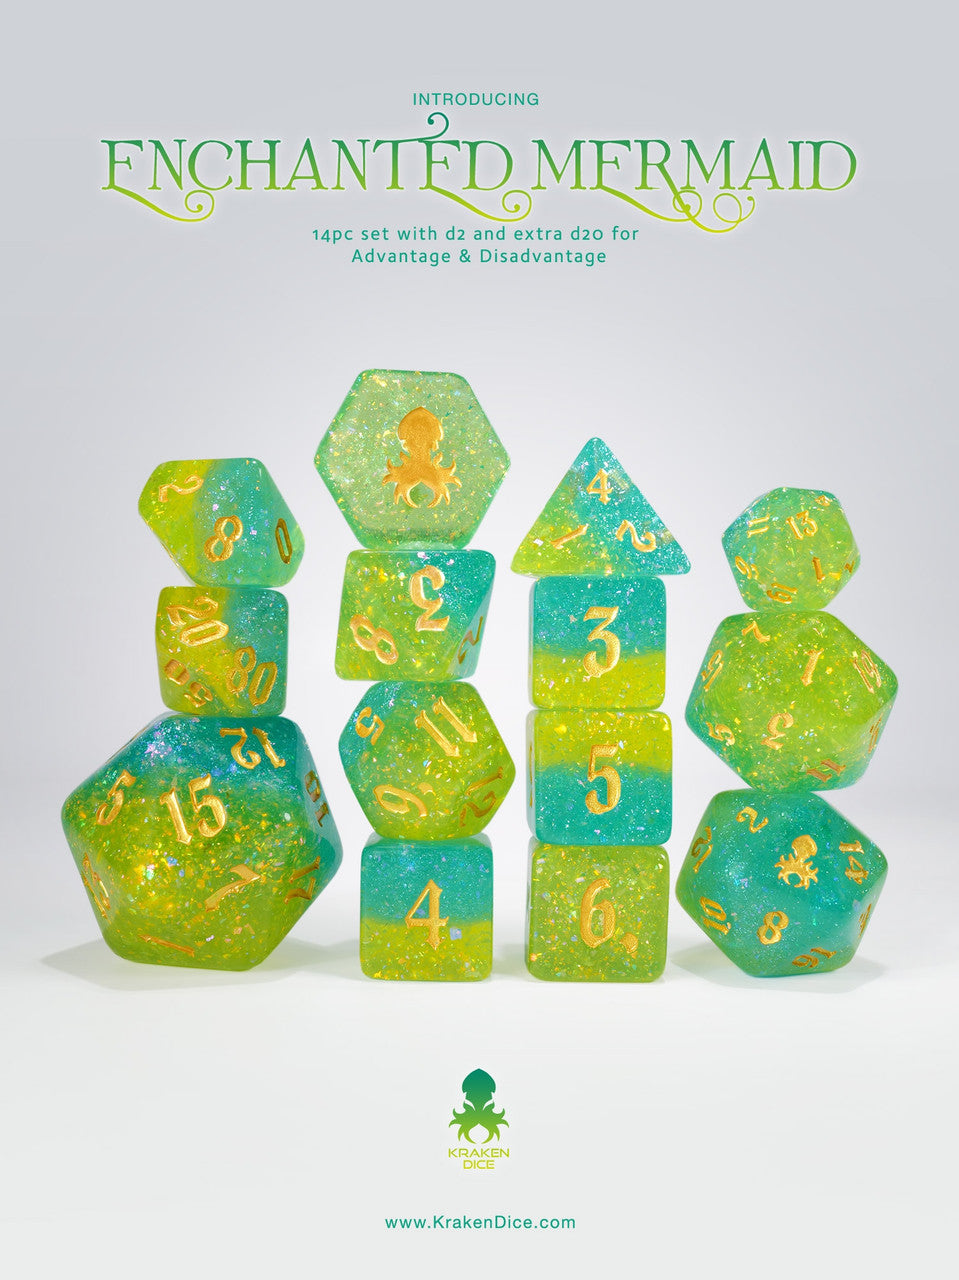 Enchanted Mermaid  - Limited Run - 14pc Dice Set Inked in Gold